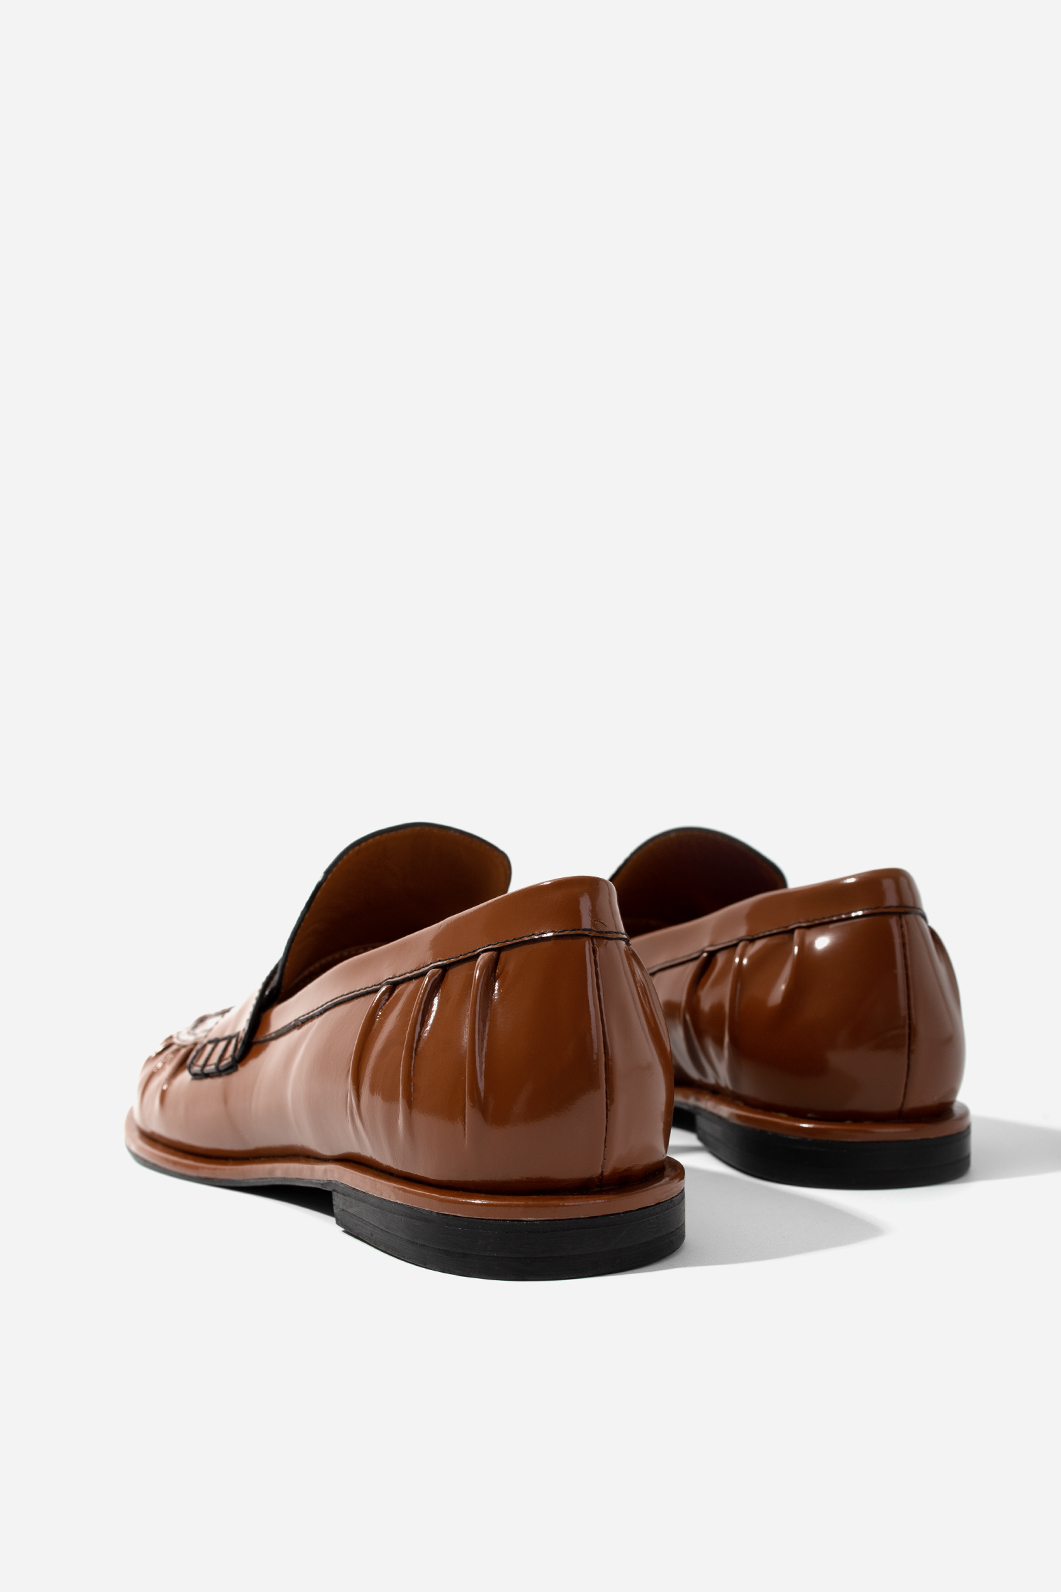 Seleste brown leather loafers